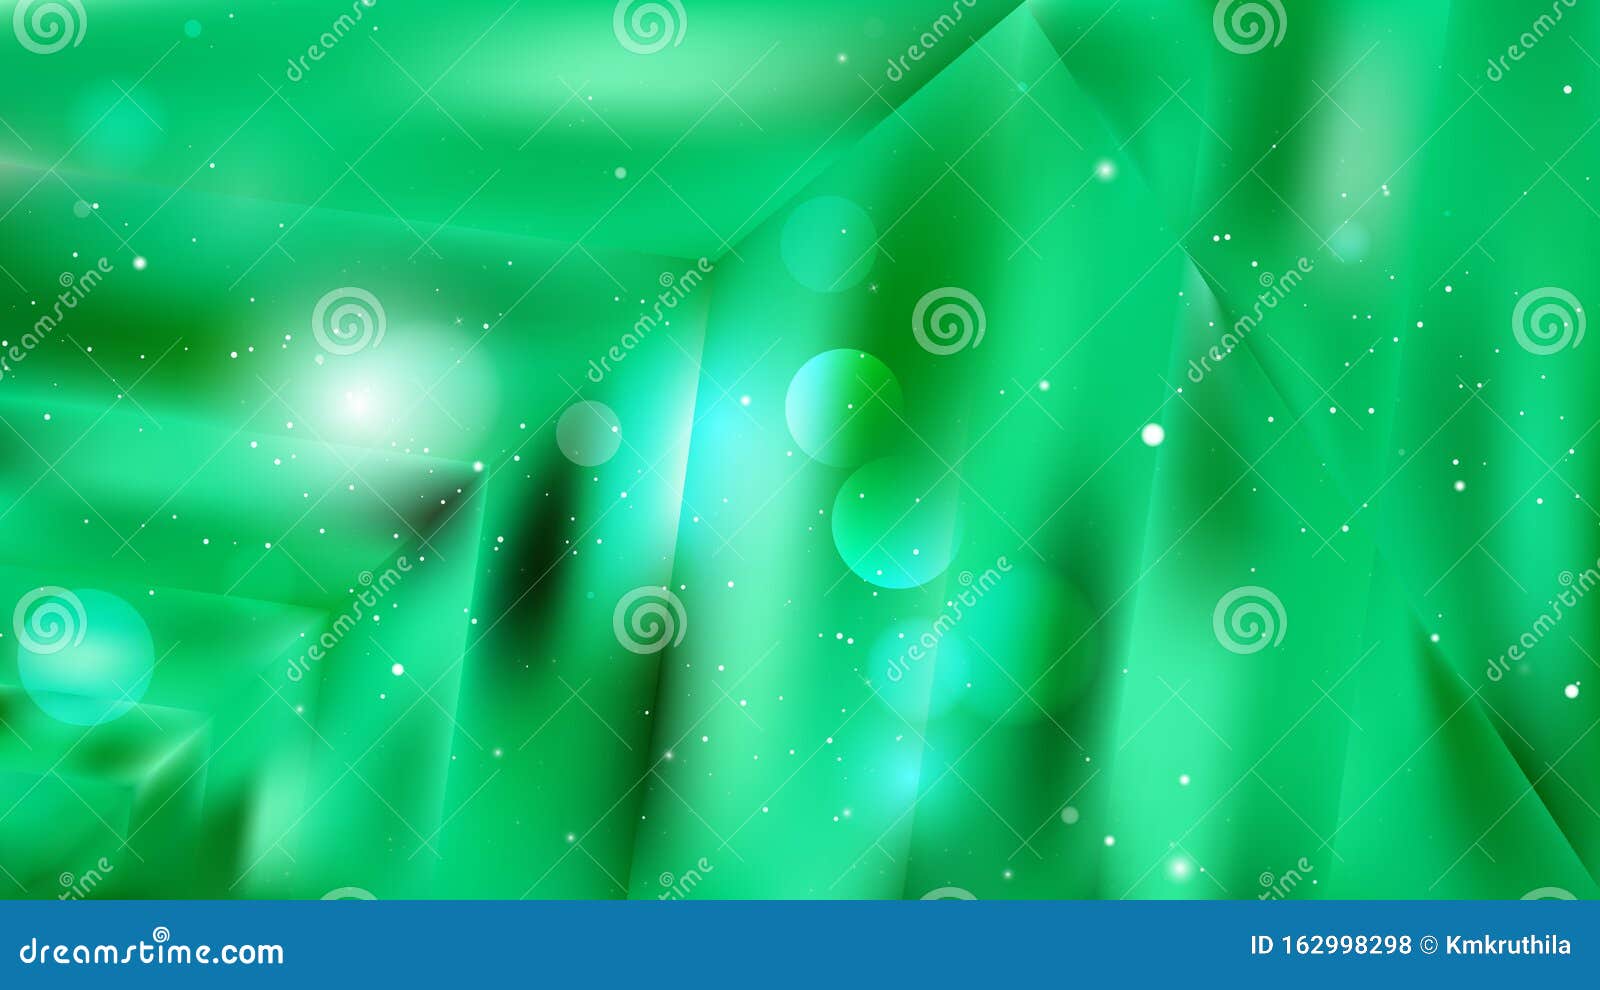 Emerald Green Color Background